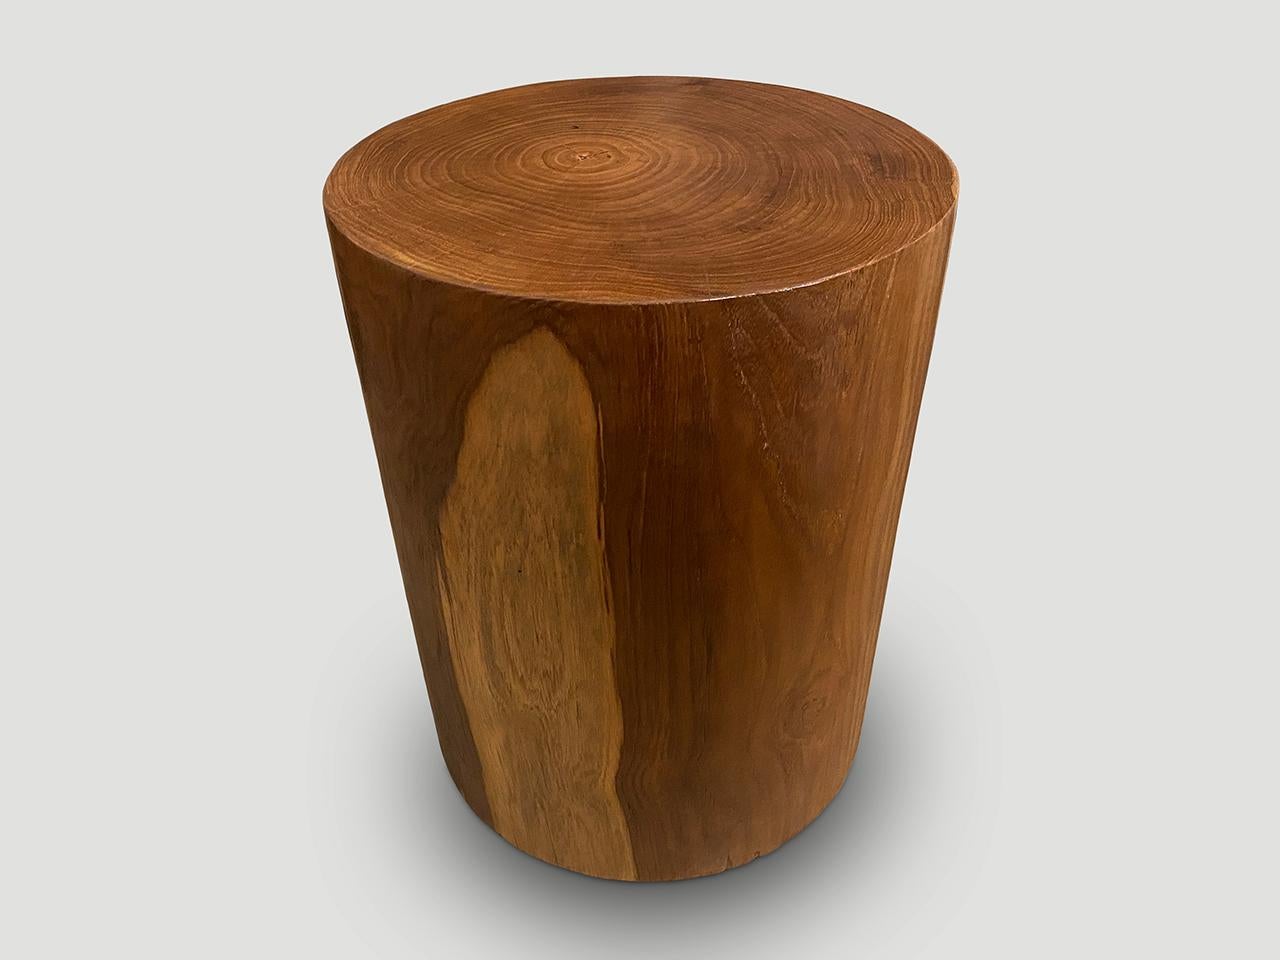 Wood Andrianna Shamaris Exquisite Rosewood Side Table